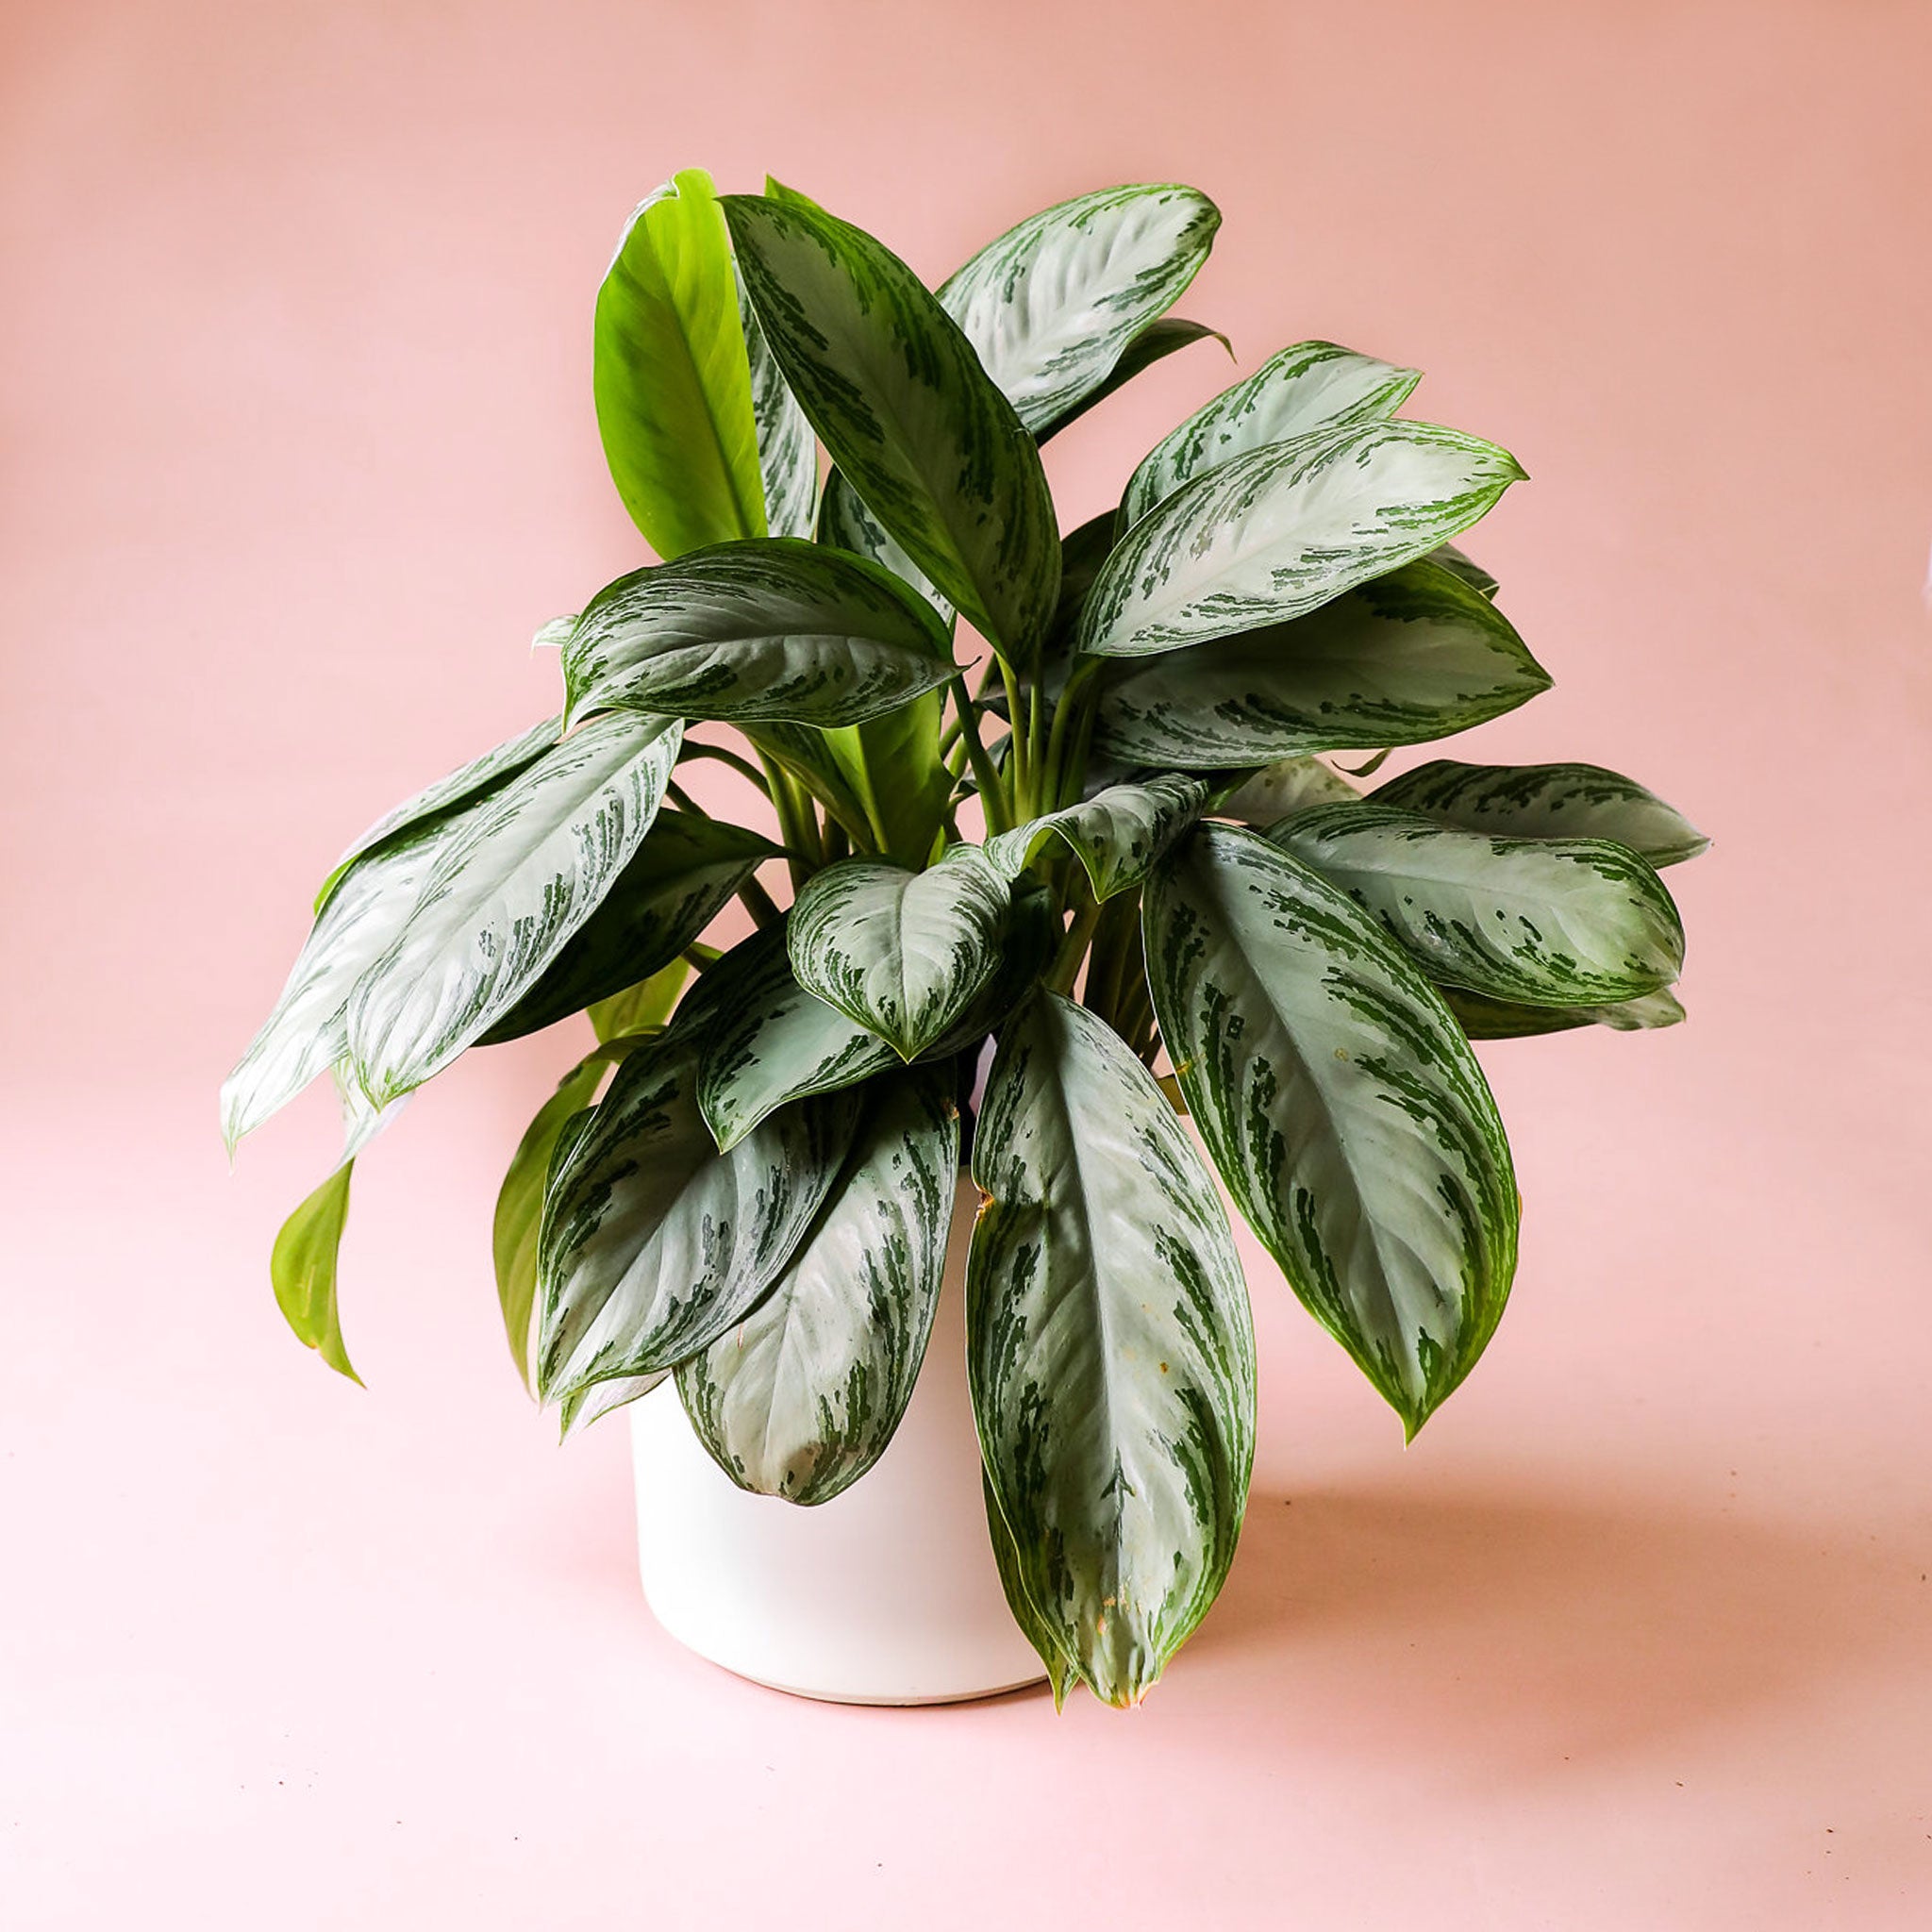 Chinese evergreen silver bay with many leaves in a white pot